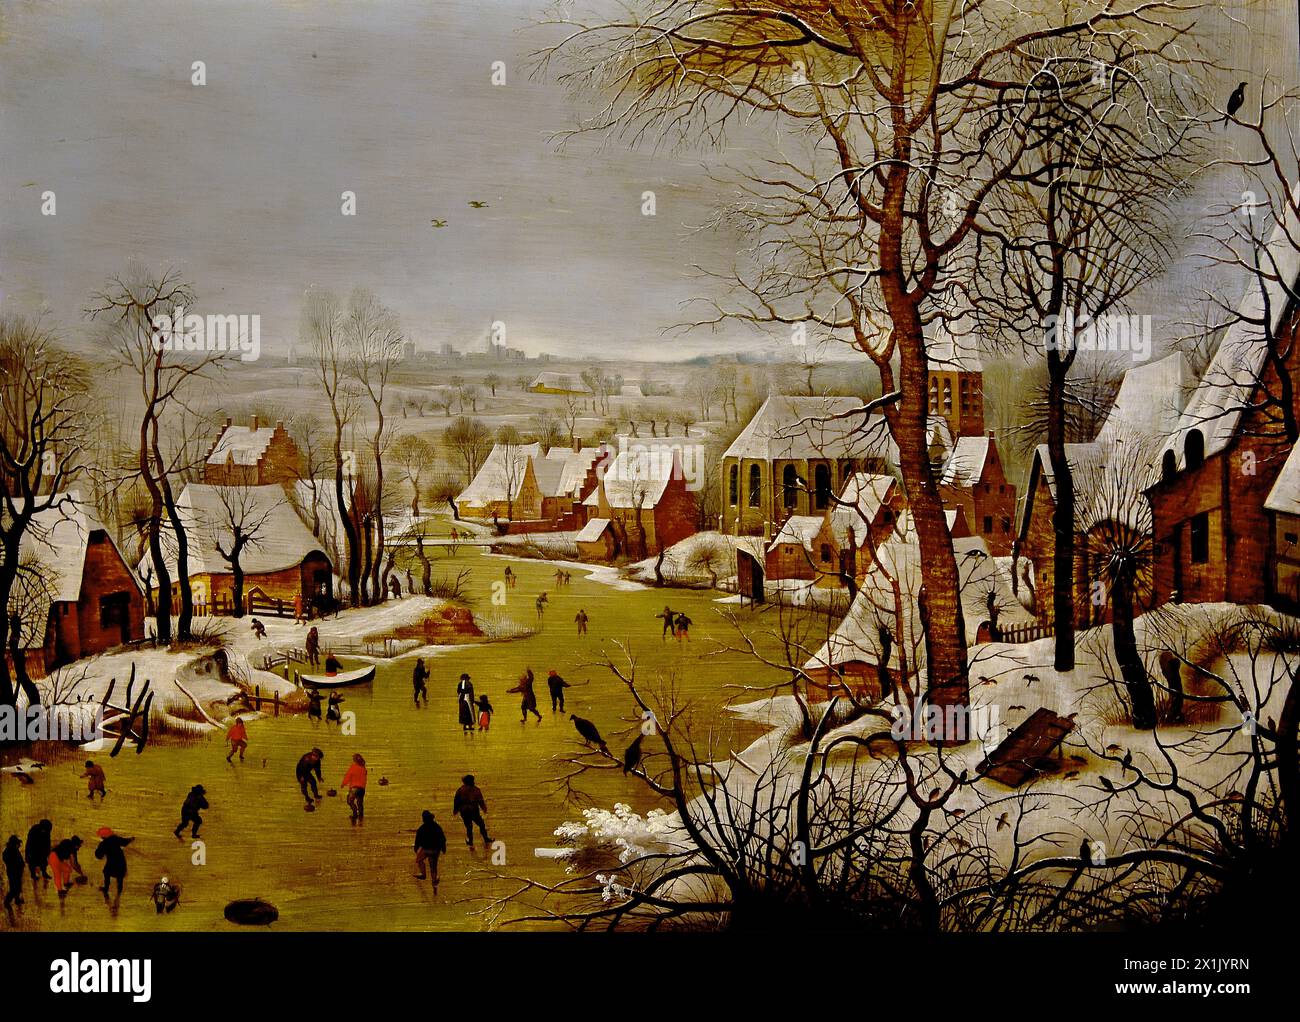 Winter landscape with bird's eye view and the flight to Egypt by  Pieter (II) Brueghel 1622 Museum Mayer van den Bergh,  Antwerp, Belgium, Belgian.( One of the oldest copies after the original by Pieter Bruegel I, dated 1565, in Brussels, K.M.S.K. (ex-commissioned Delporte). Exceptionally, this response features a group of the fleeing H.Familie. These figures are also missing from the original. In the threatening birdsong, people wanted to see an allusion to the disasters brought on the Netherlands by the Spanish rule. ) Stock Photo